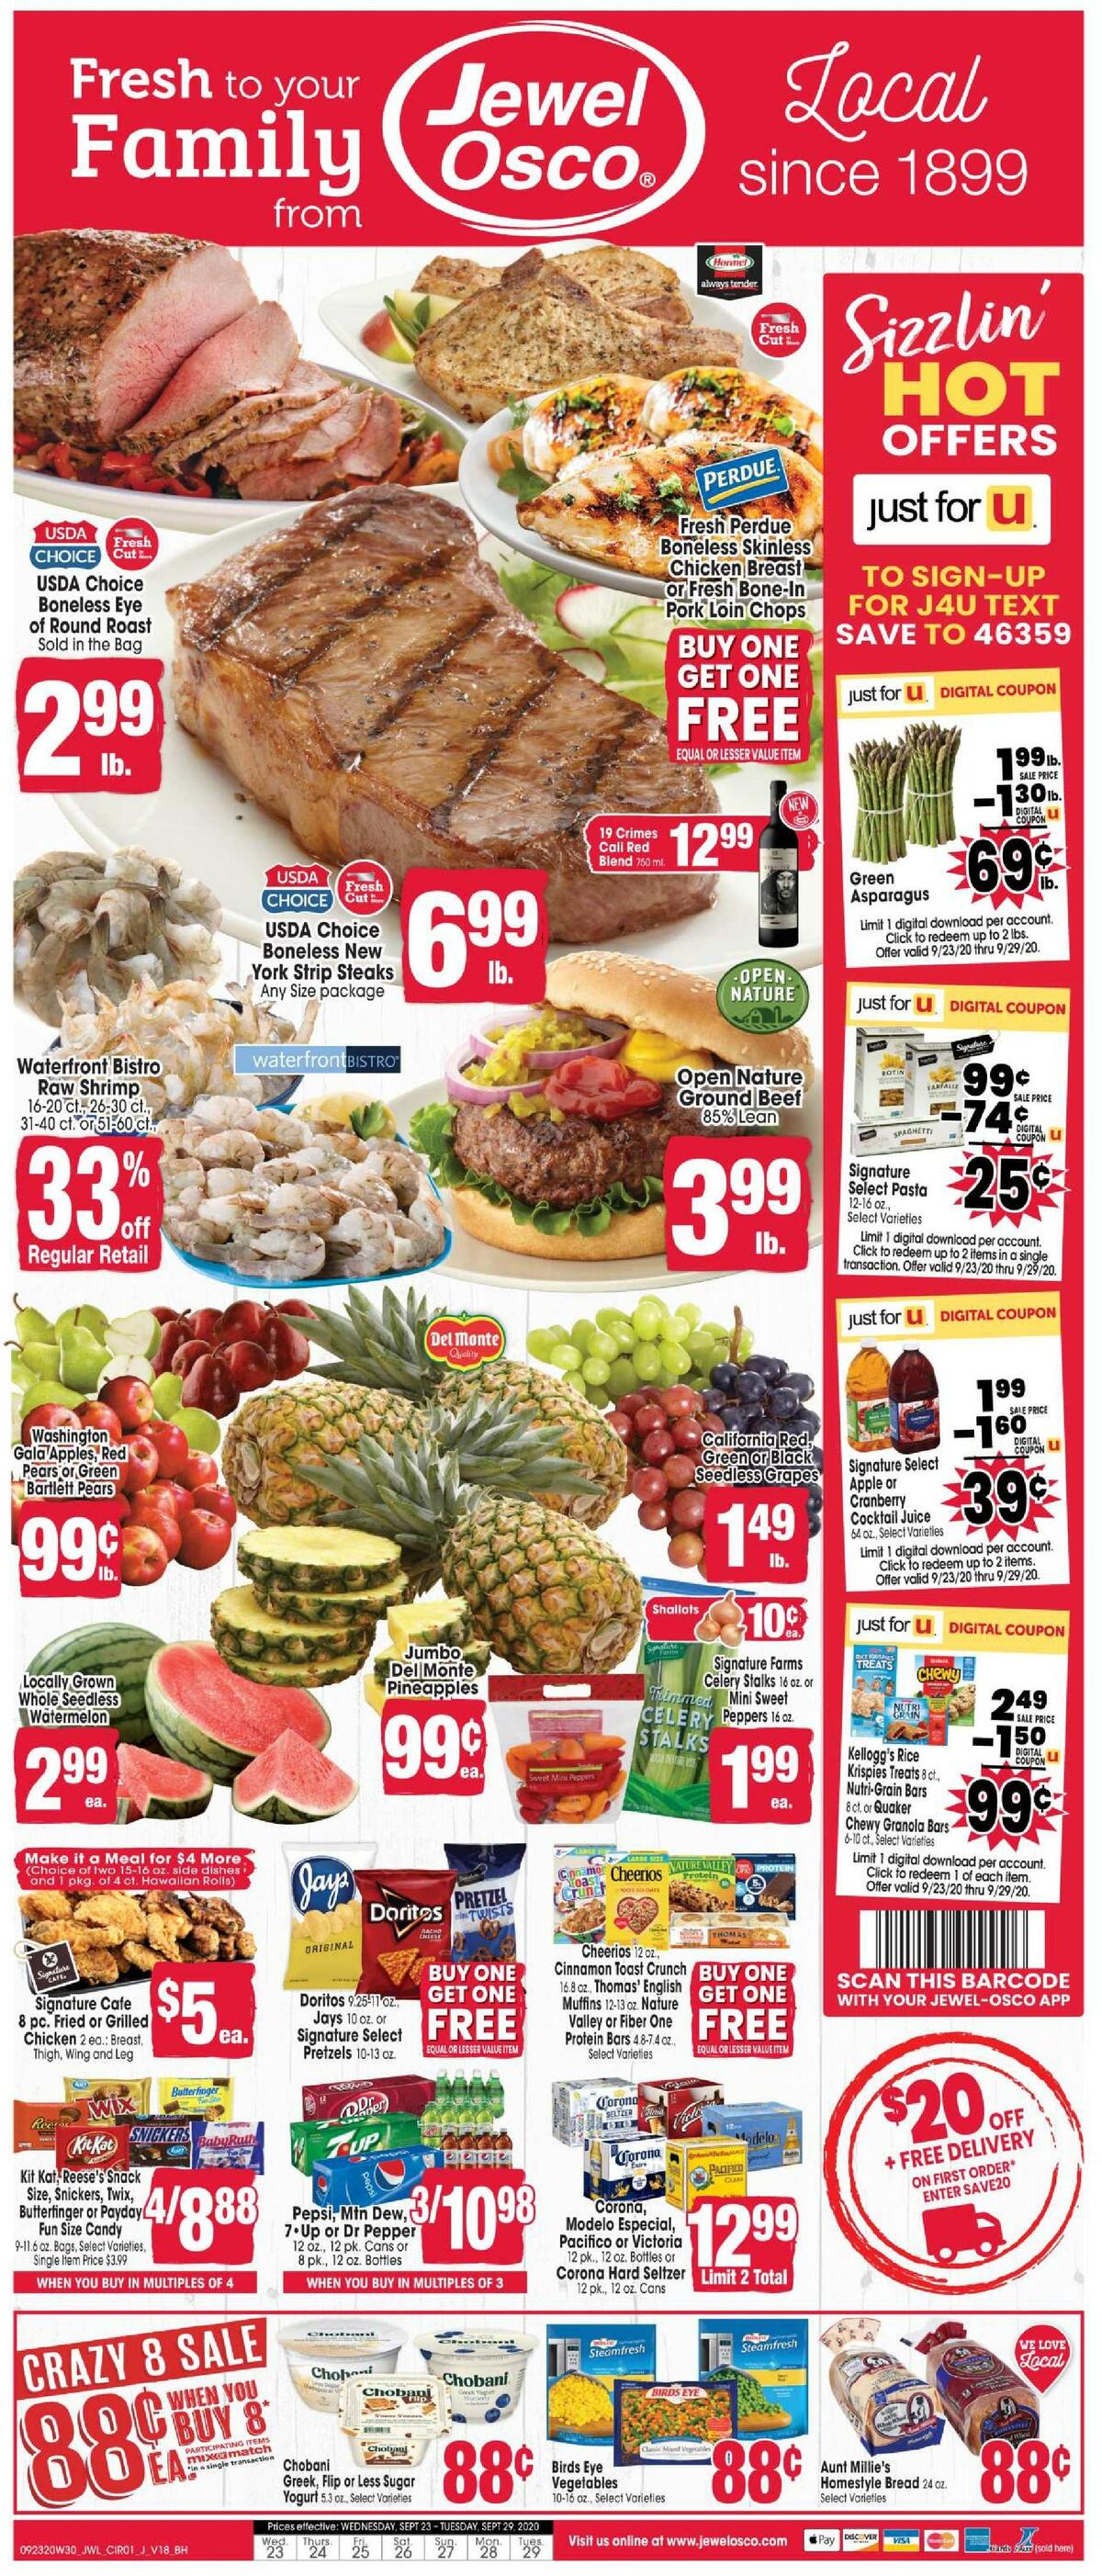 Jewel Osco Weekly Ad from September 23